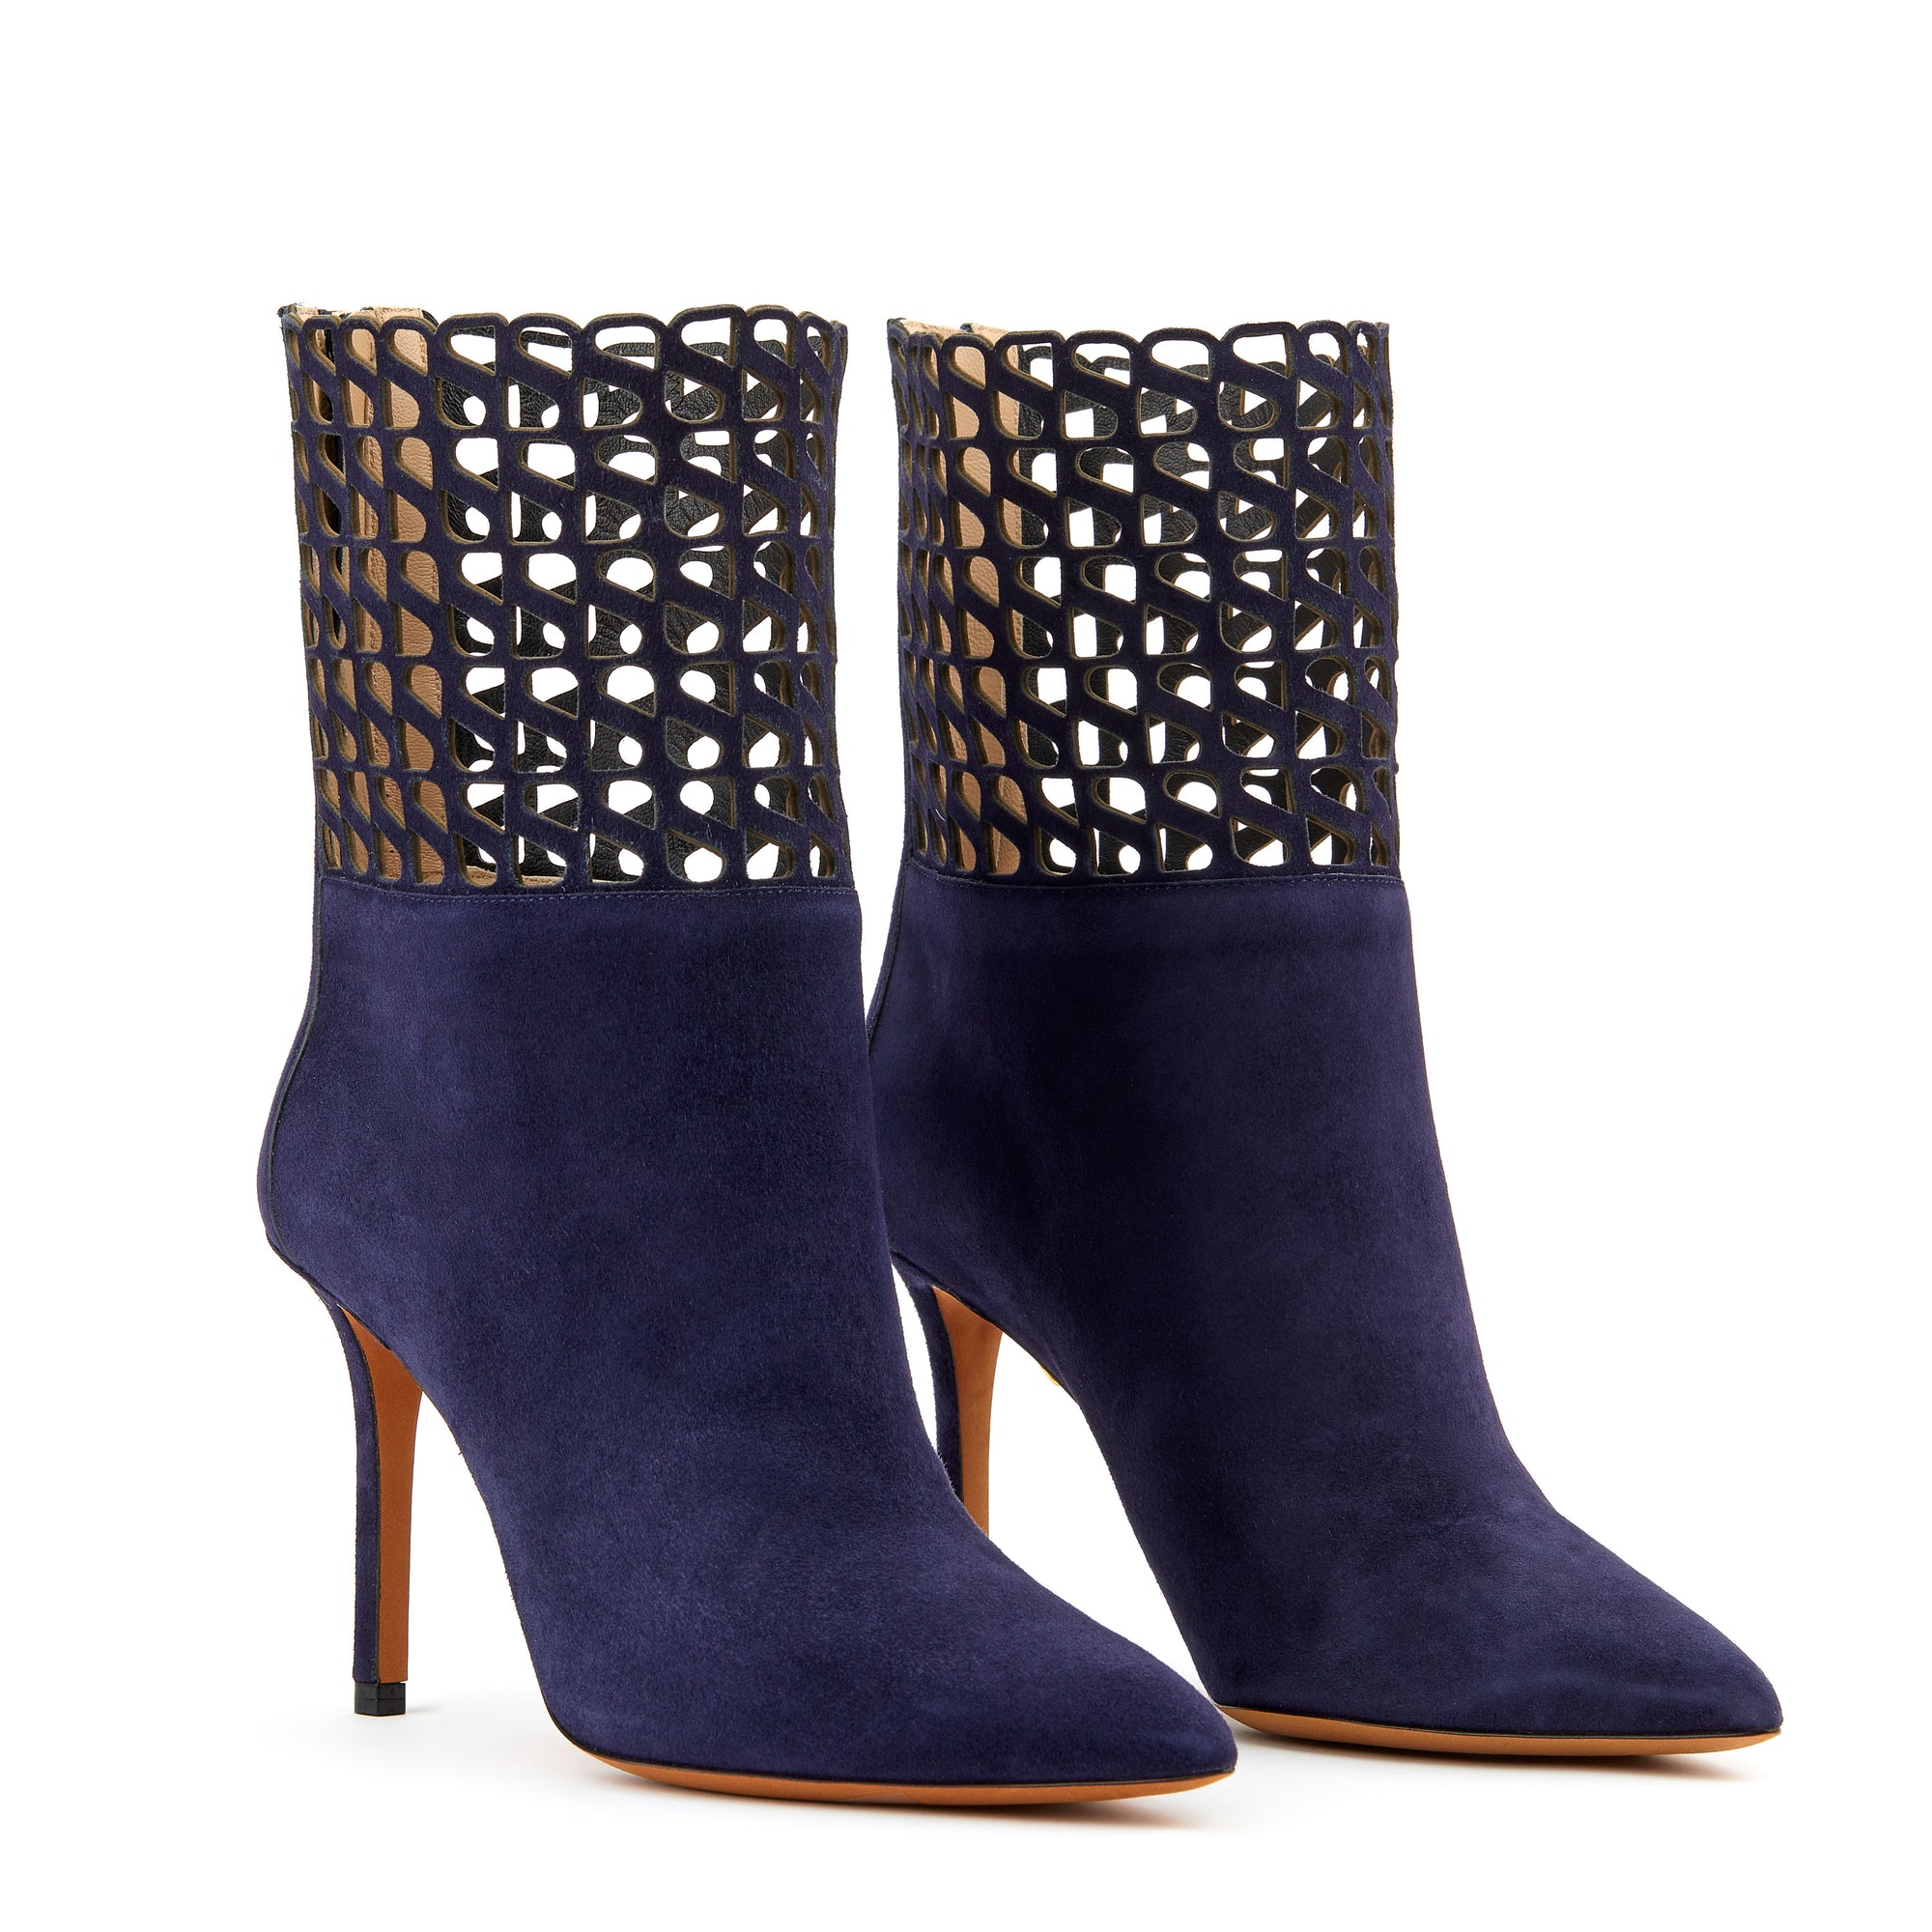 Alexia 90 heeled boots in suede - Navy